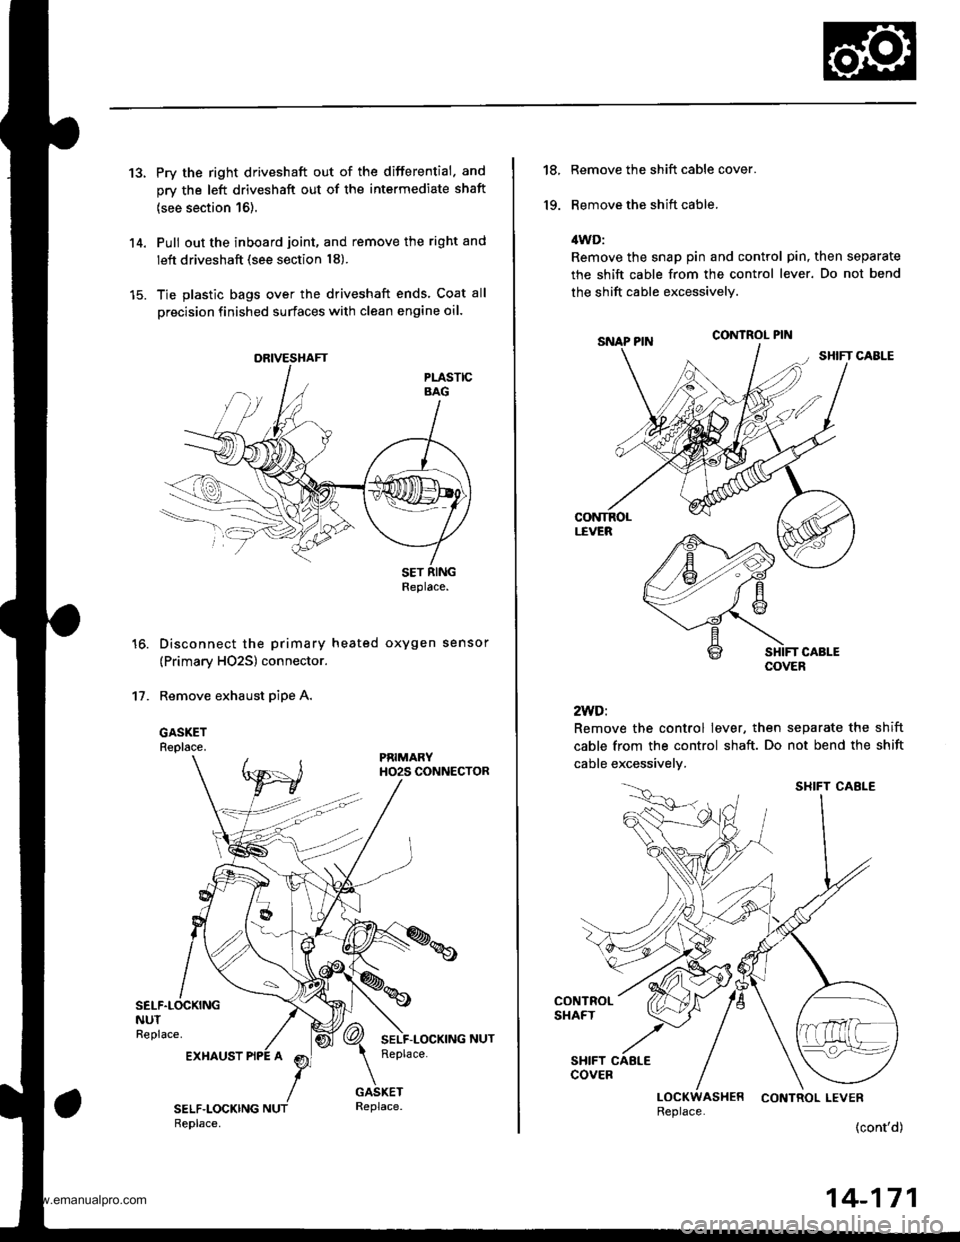 HONDA CR-V 2000 RD1-RD3 / 1.G Owners Guide 
13.Pry the right driveshaft out of the differential. and
orv the left driveshaft out of the intermediate shaft
{see section 16).
Pull out the inboard joint, and remove the right and
left driveshaft (